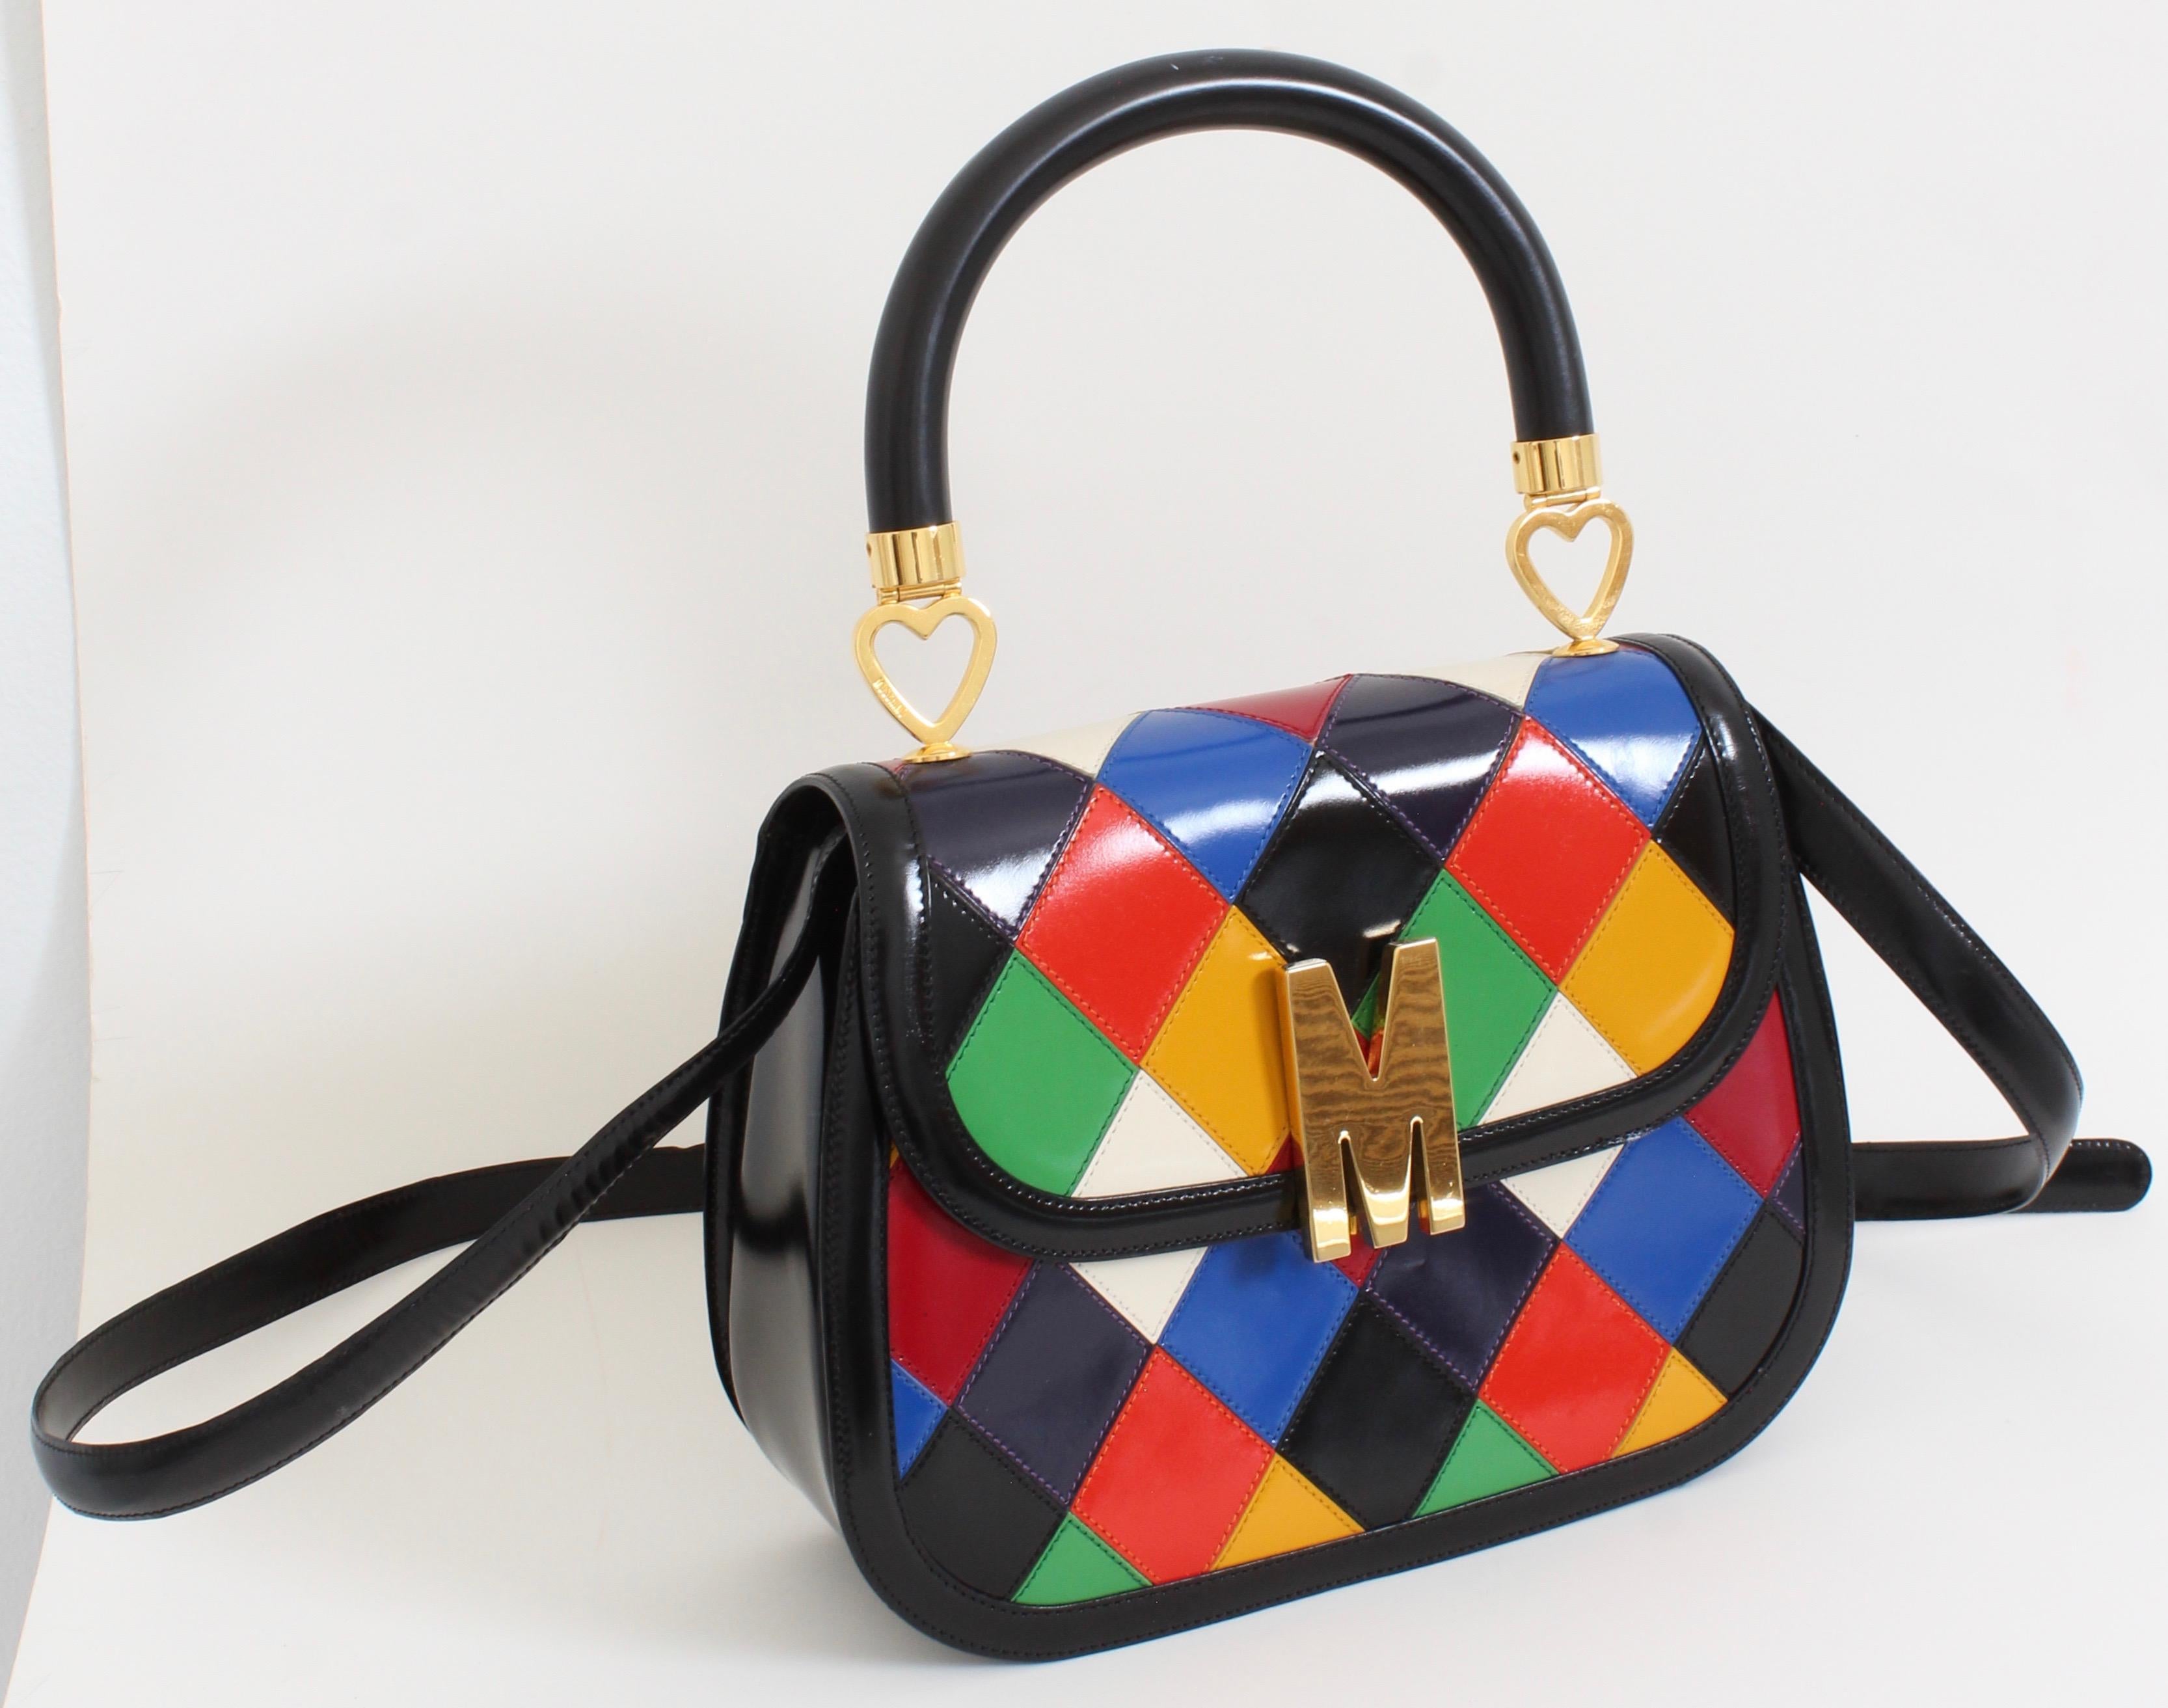 Rare Moschino Leather Bag Harlequin Patch Top Handle with Shoulder Strap Italy 1